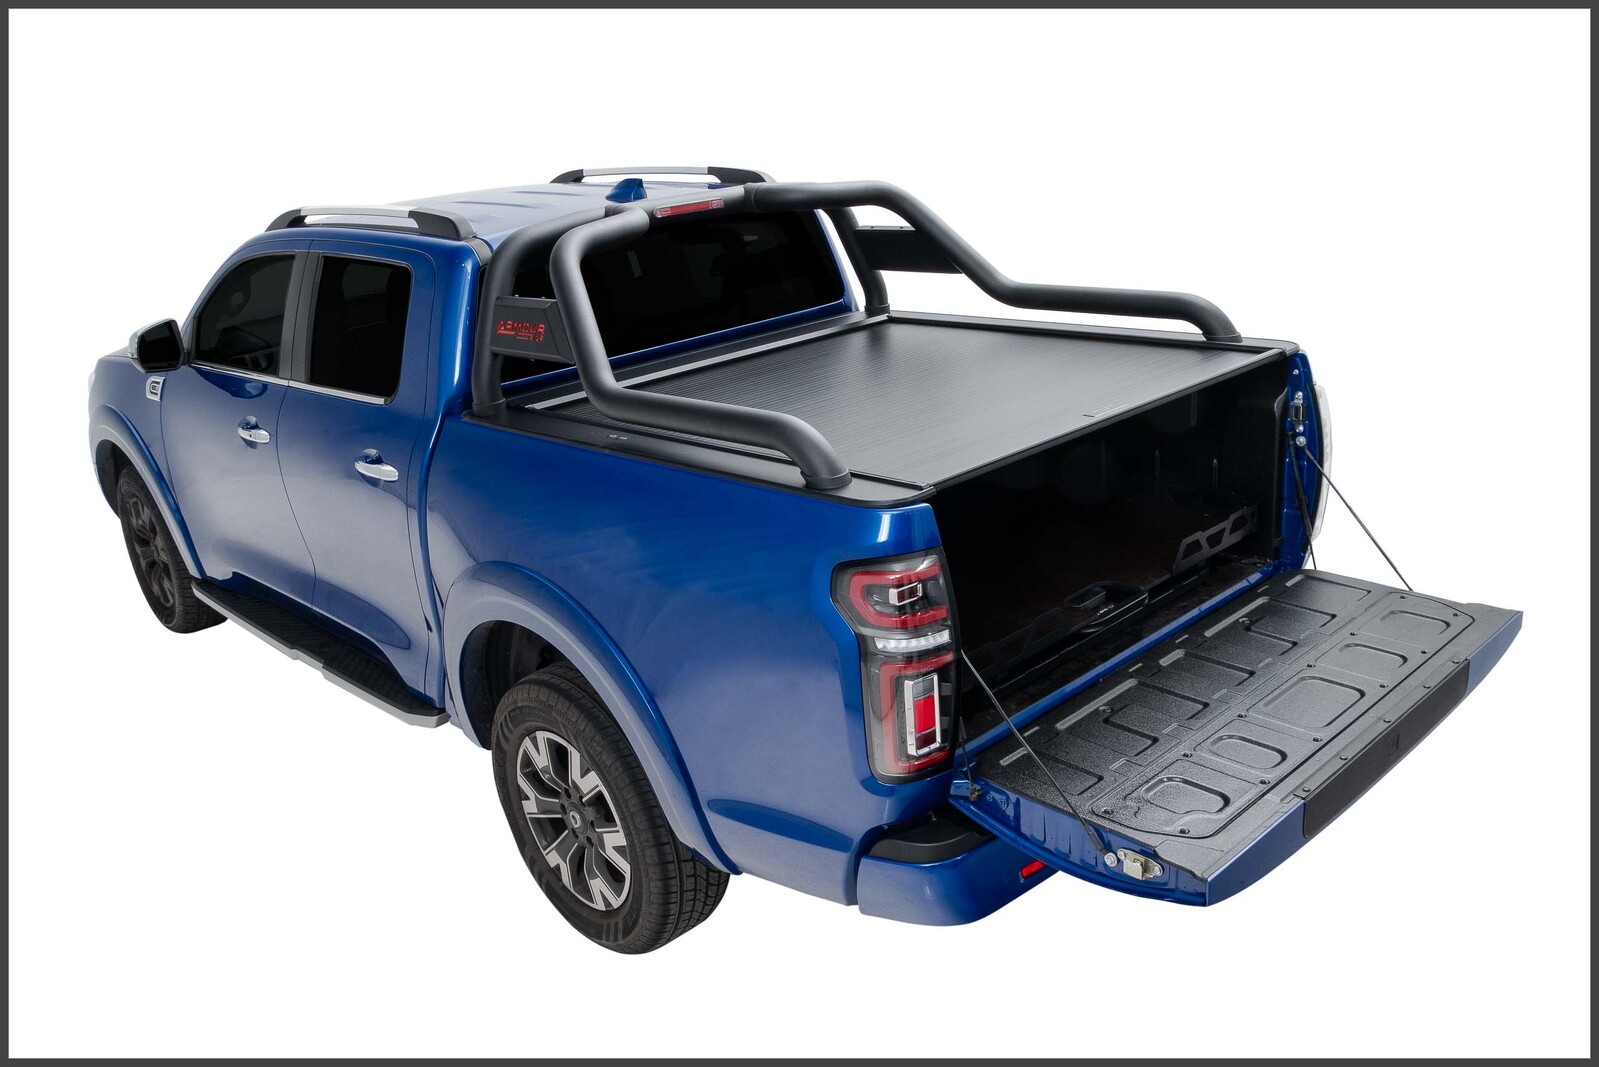 HSP Roll R Cover Series 3 To Suit GWM Haval Cannon Dual Cab NPW - 2020+ With Armour Bar Sports Bar